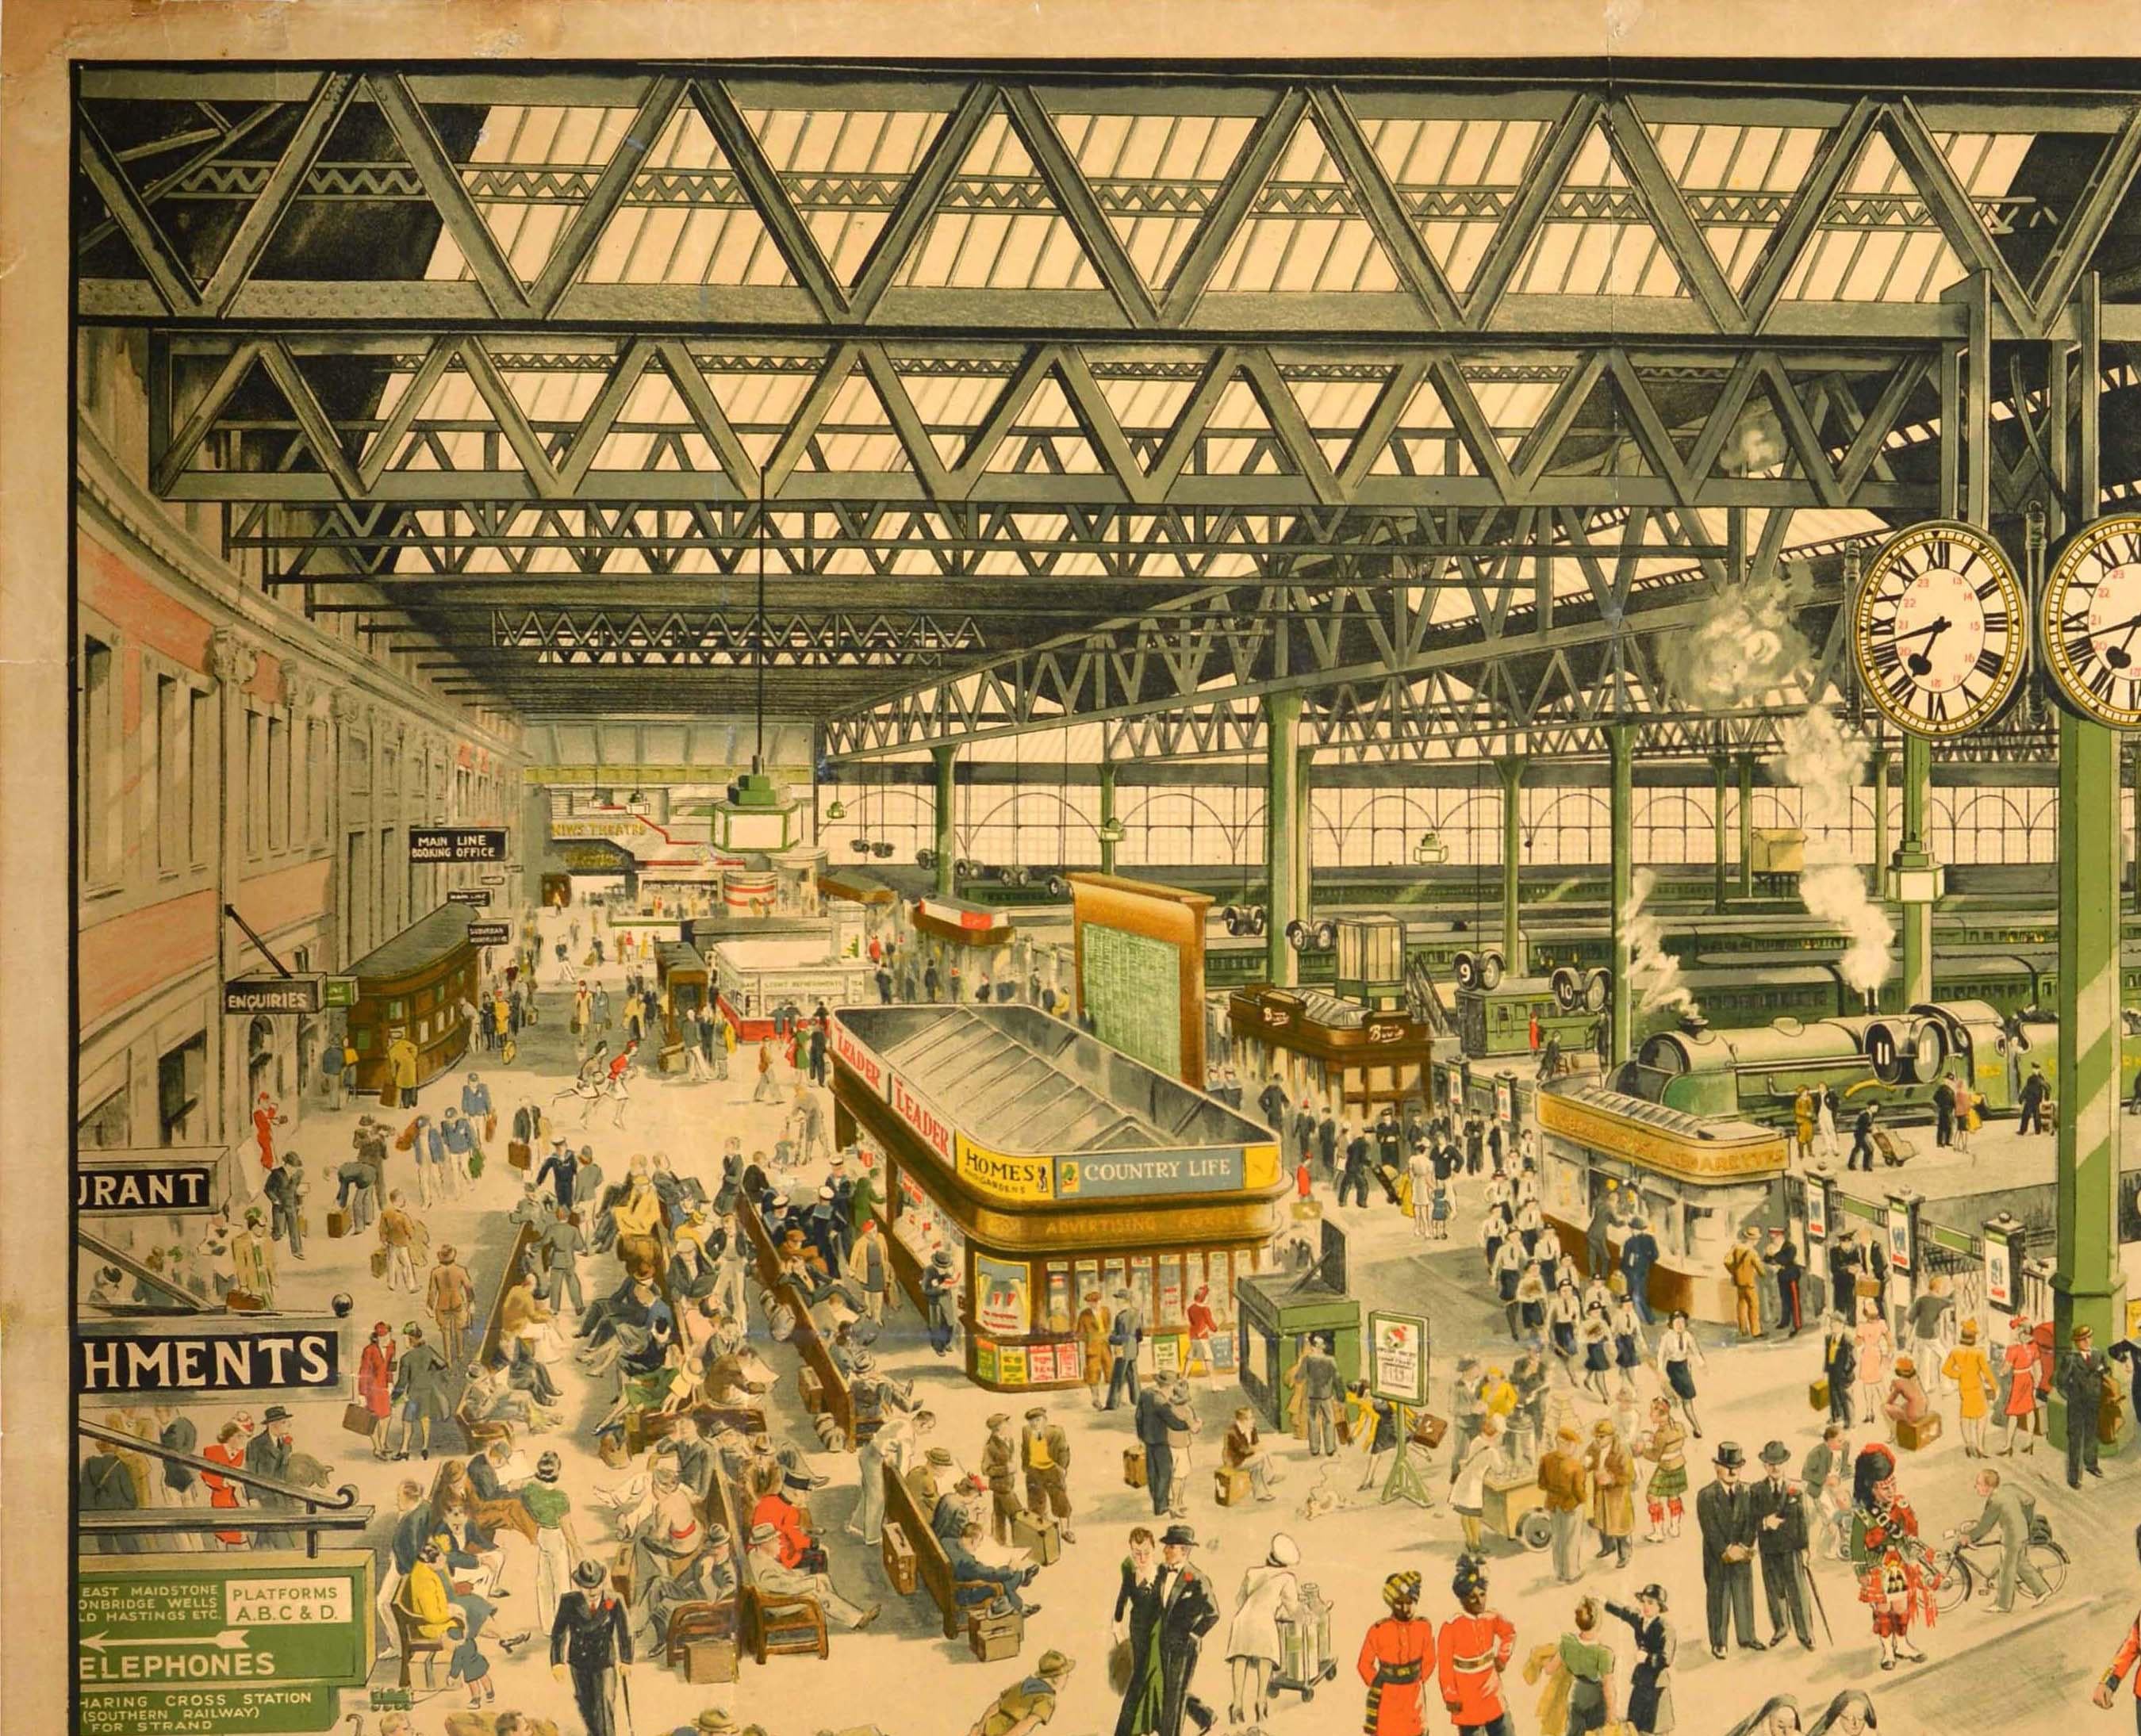 Original vintage train travel advertising poster issued by Southern Railway - Waterloo Station 1848-1948 A Centenary of Uninterrupted Service During Peace and War - featuring a detailed illustration of the busy Central London station depicting